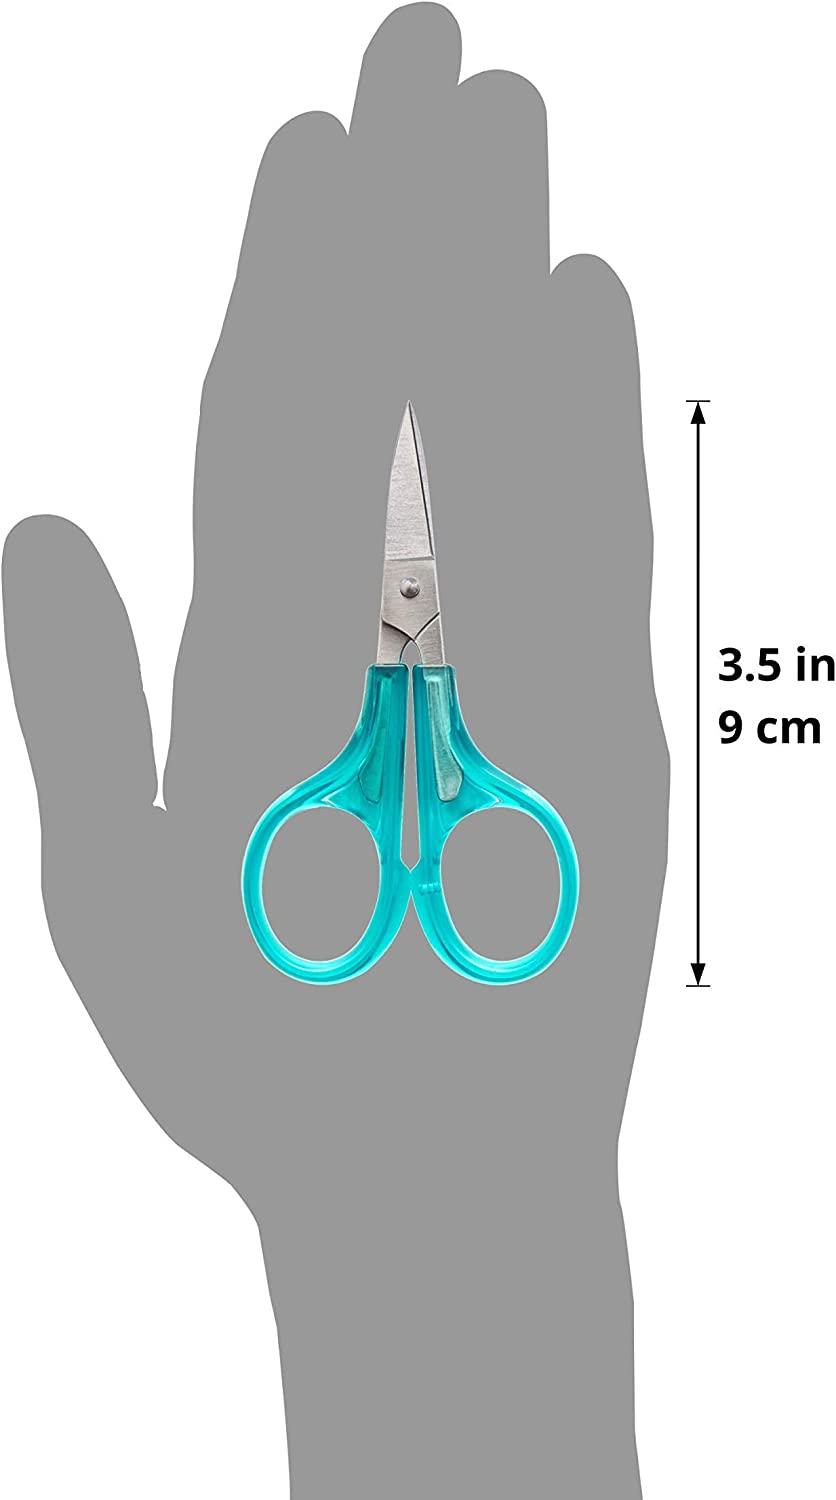 Beaditive Precision Craft Scissors - Stainless Steel Paper Crafting  Scissors With Safety Cap - Ultra Sharp Blades & Non-Slip TPR Handles -  Adult & Kid